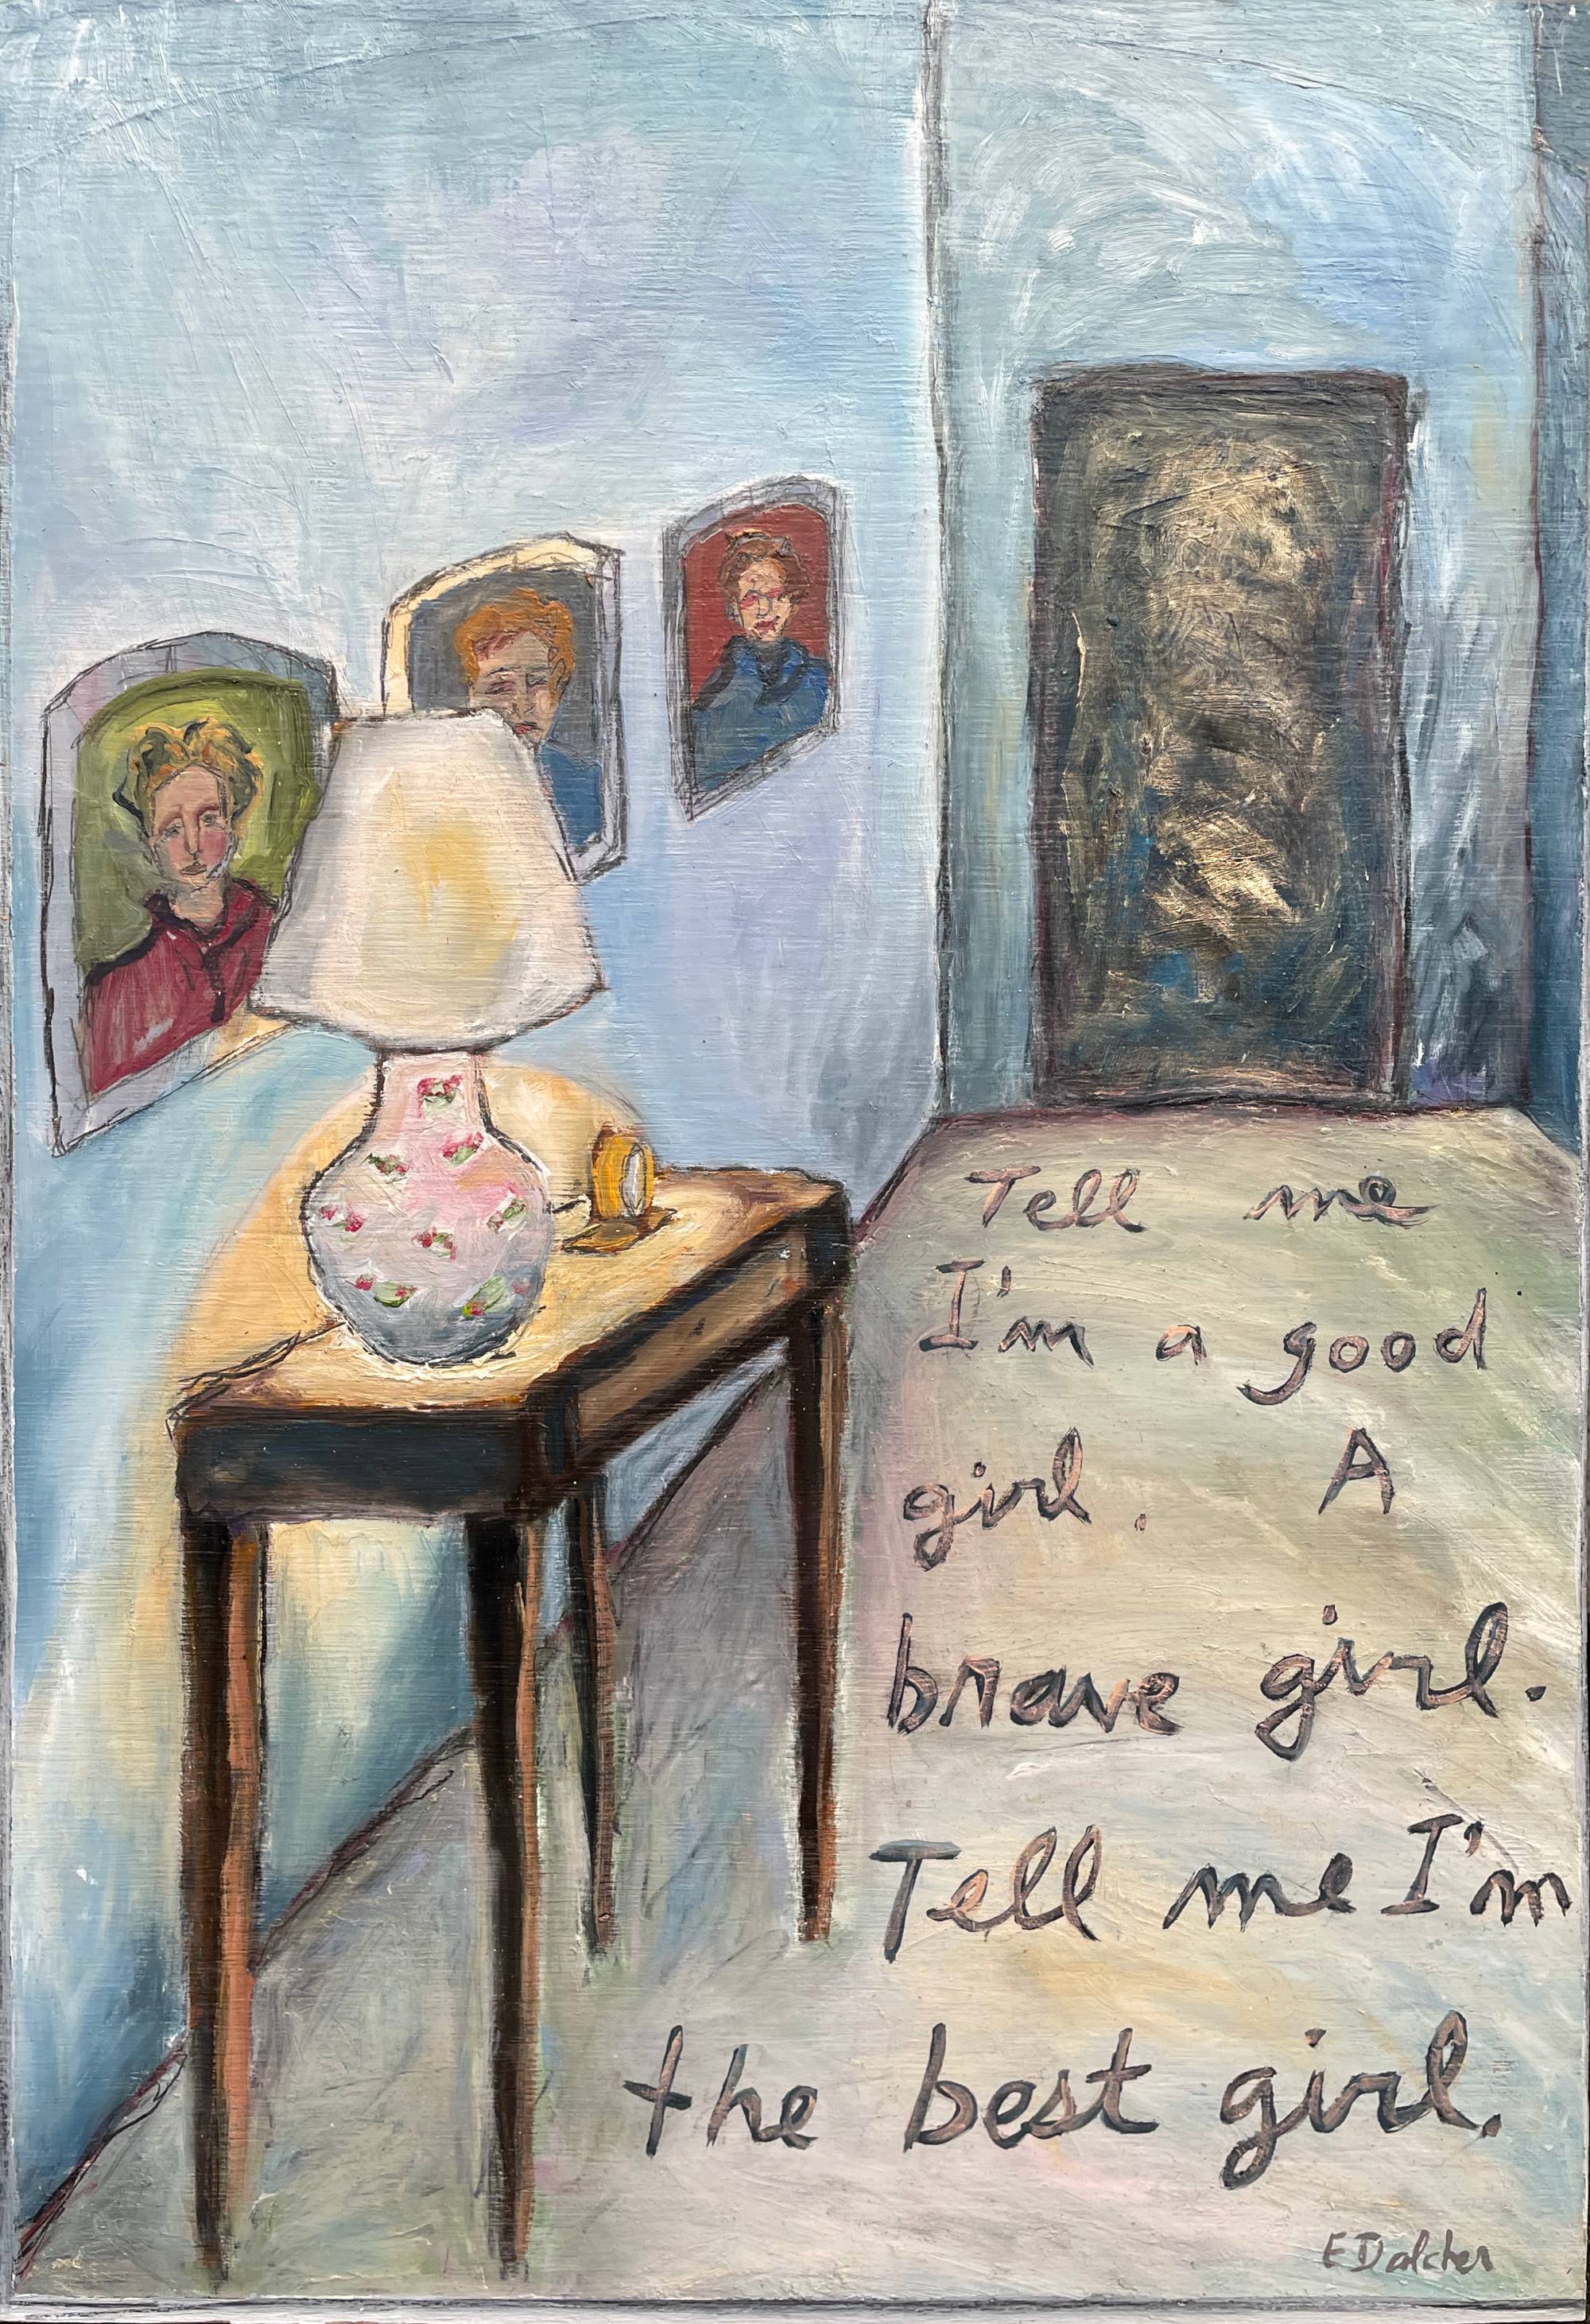 Painting of the entry hall of a home with a table and a lamp, painted on the floor are the words "Tell me I'm a good girl. A brave girl. Tell me I'm the best girl."